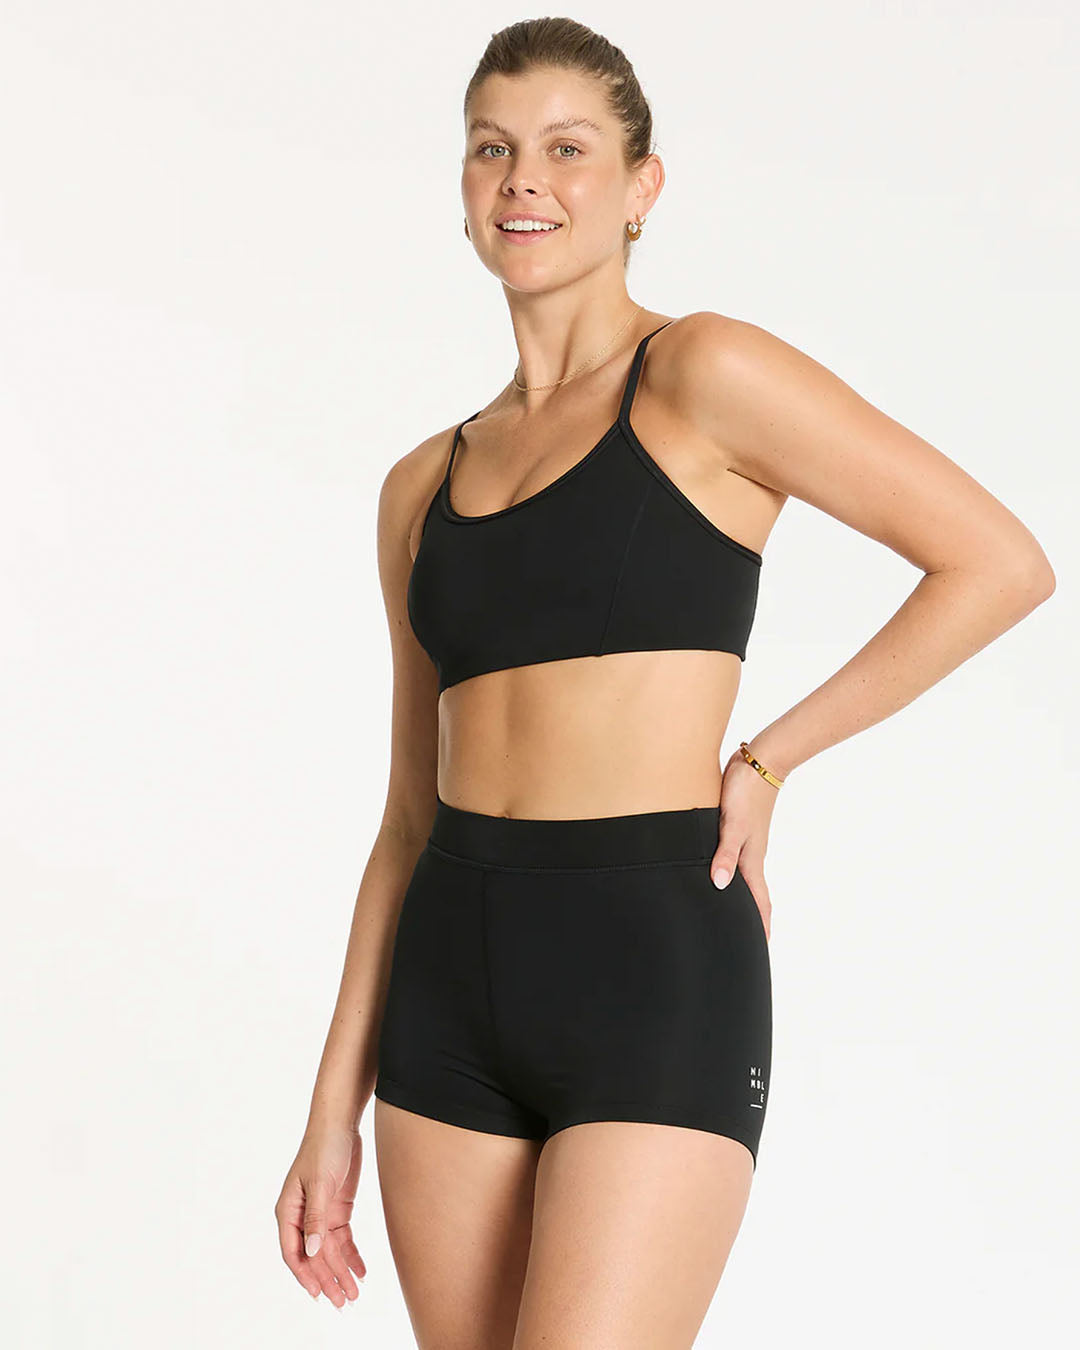 Twice As Nice Reversible Bra by Nimble Activewear Online, THE ICONIC